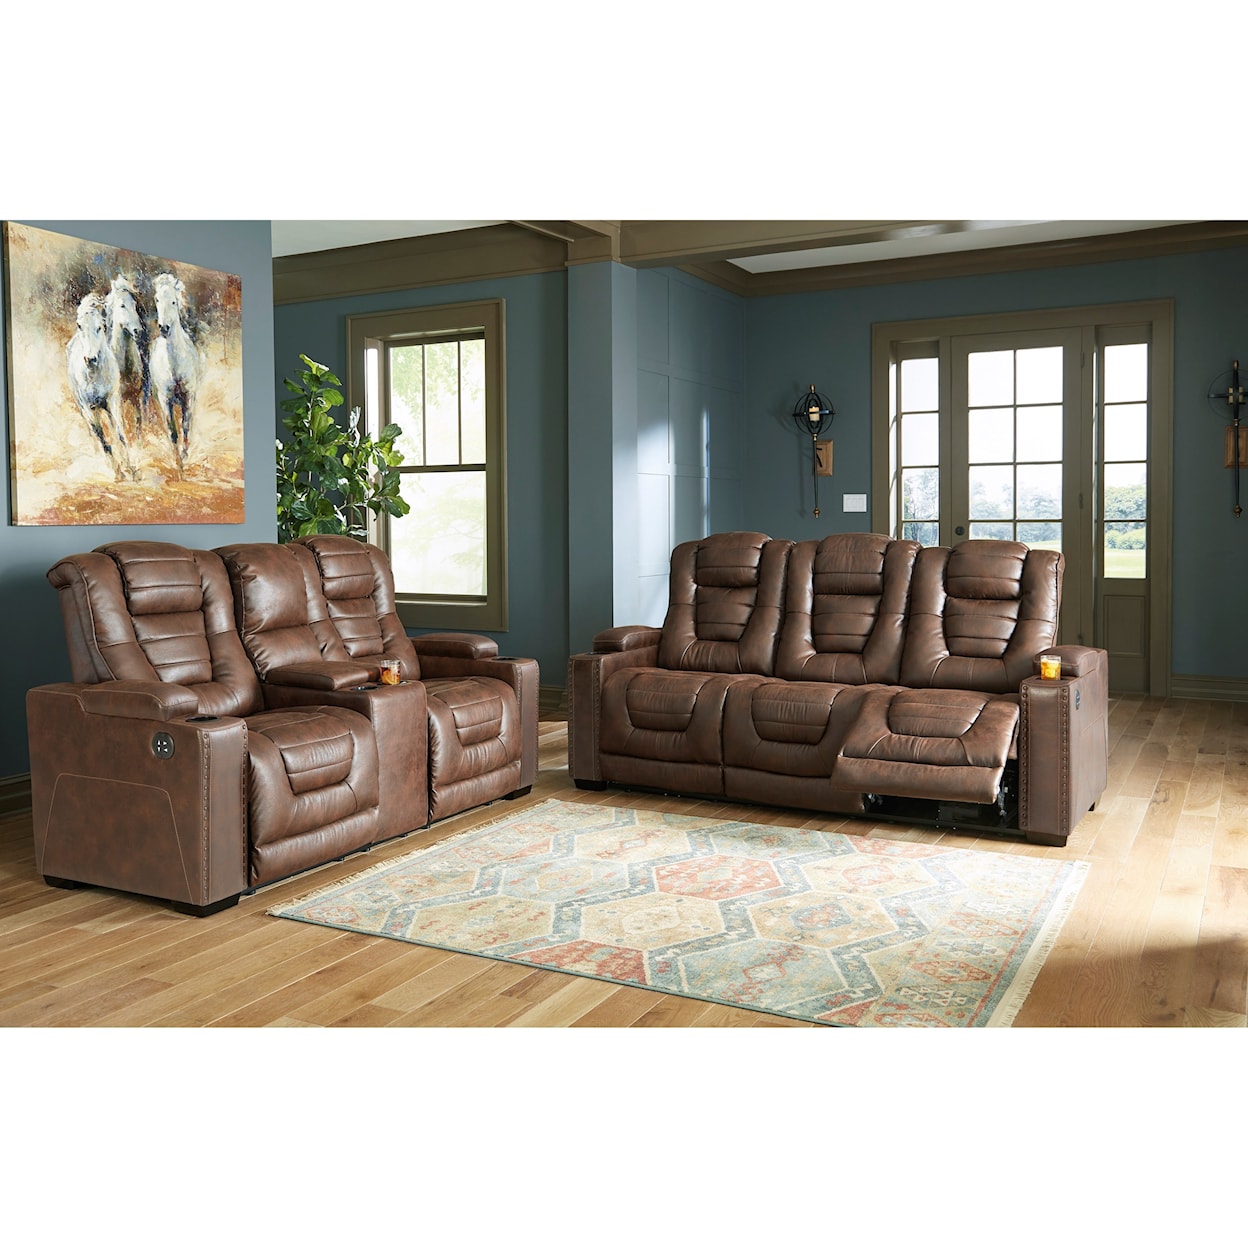 Signature Design Owner's Box Power Reclining Living Room Group